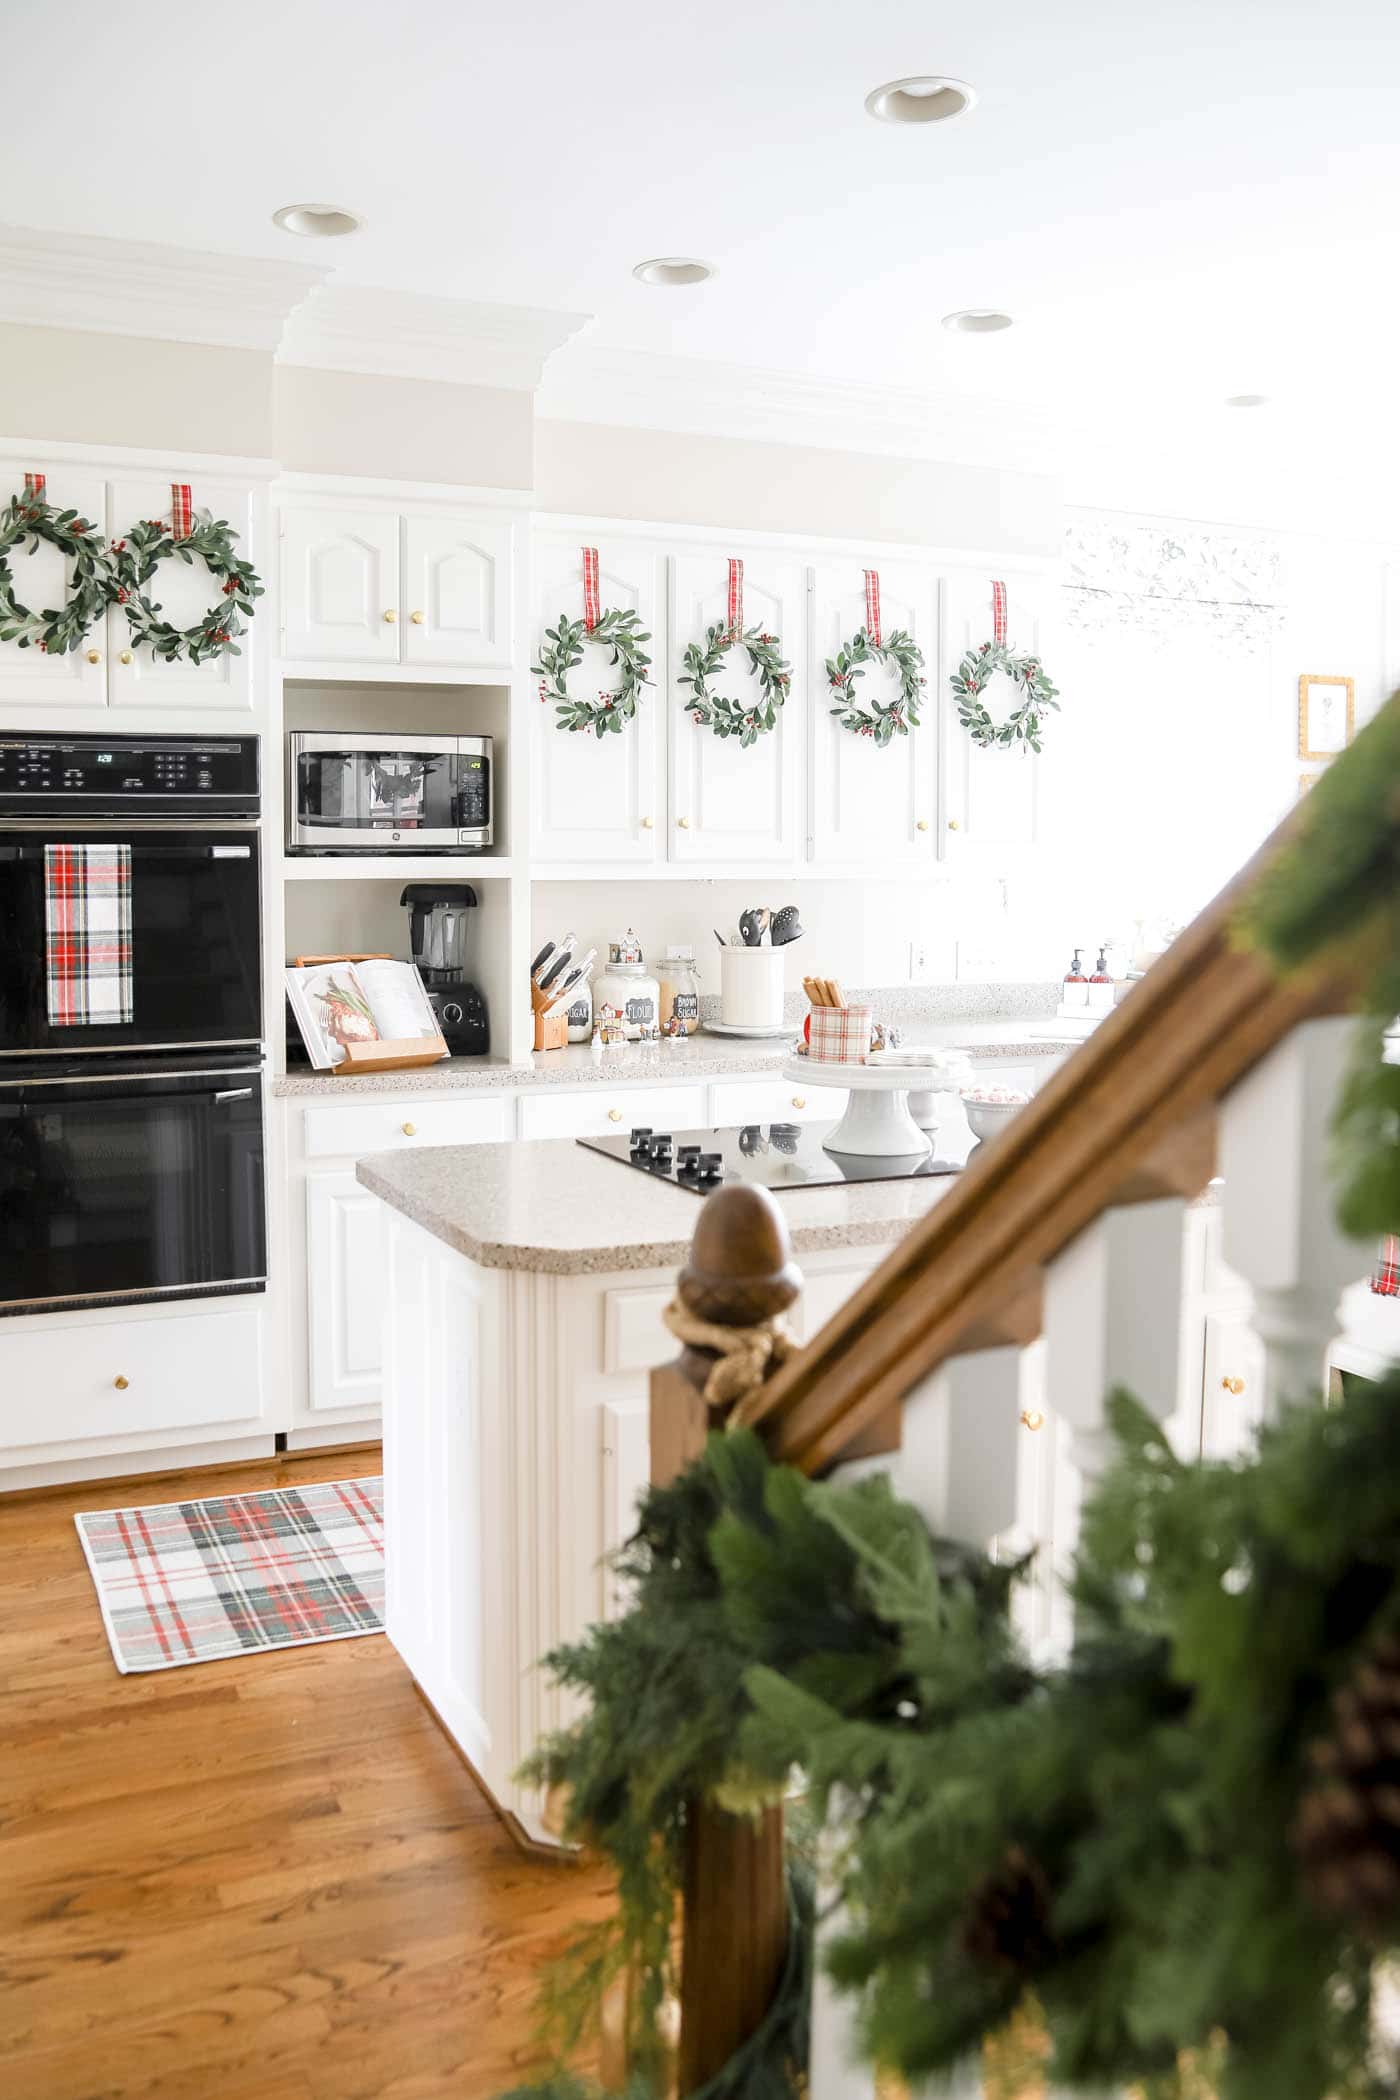 How to Decorate the Kitchen for Christmas